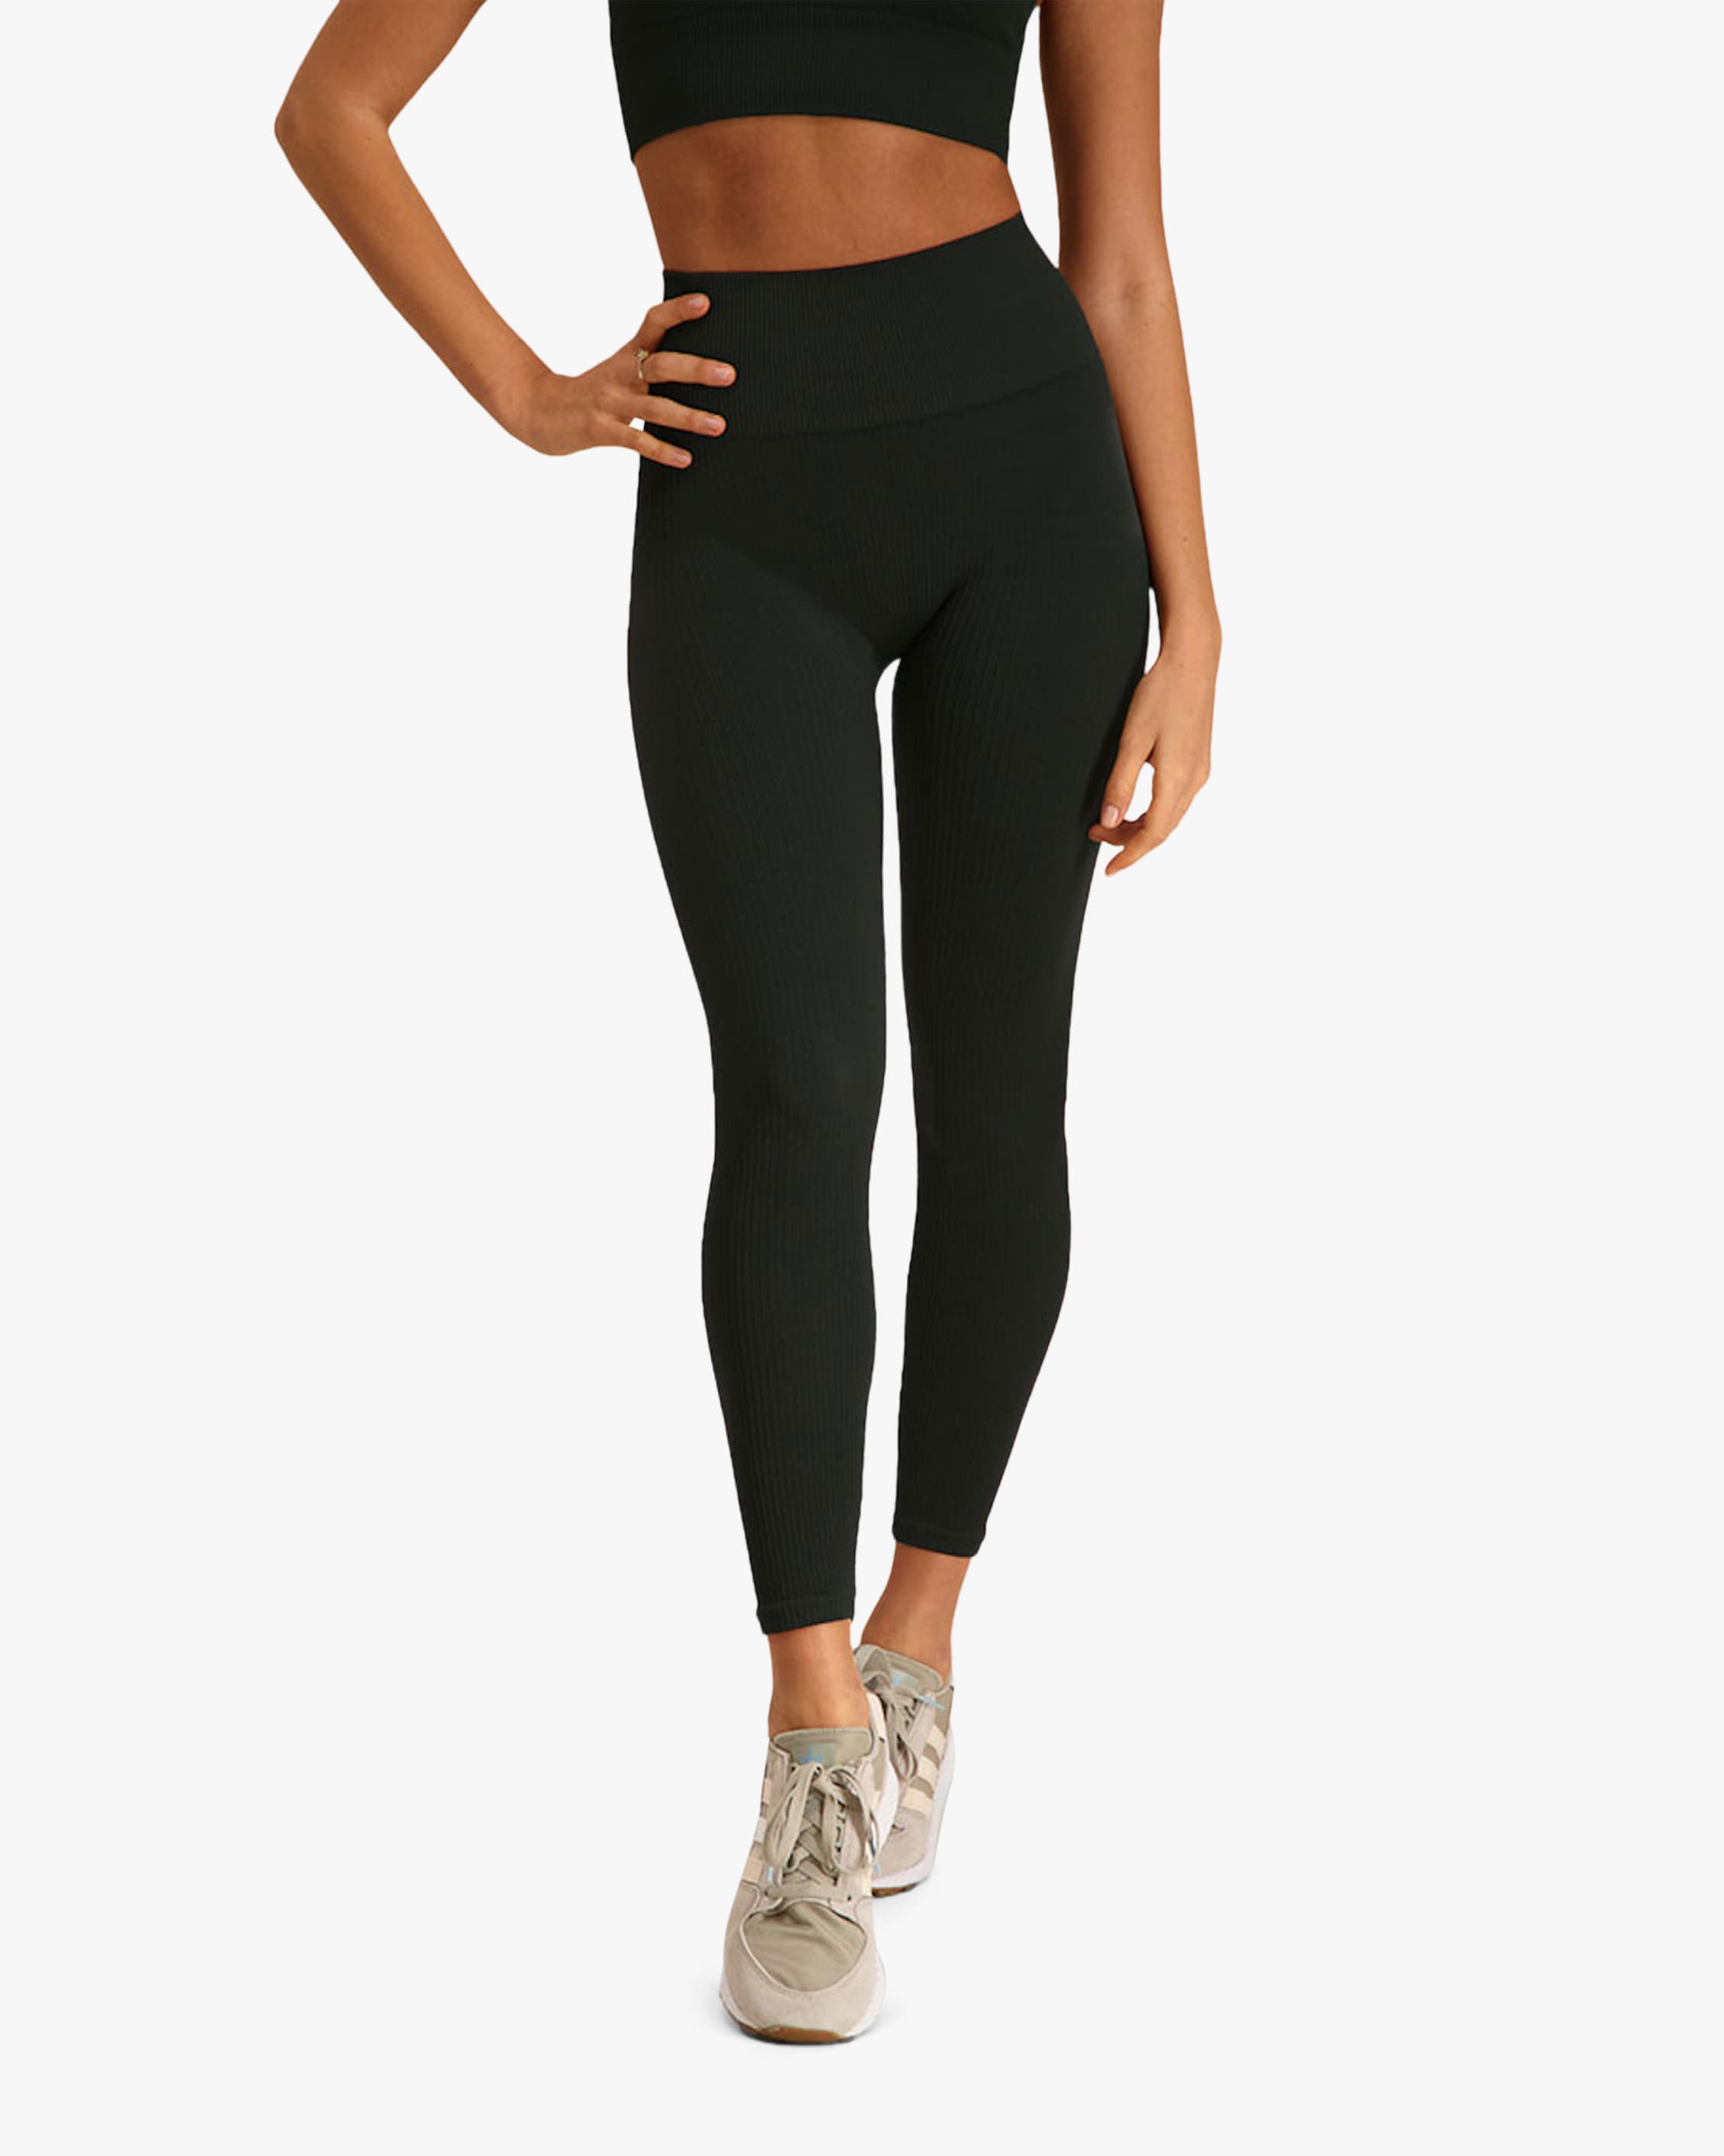 Most Popular Sport Leggings Women's  International Society of Precision  Agriculture